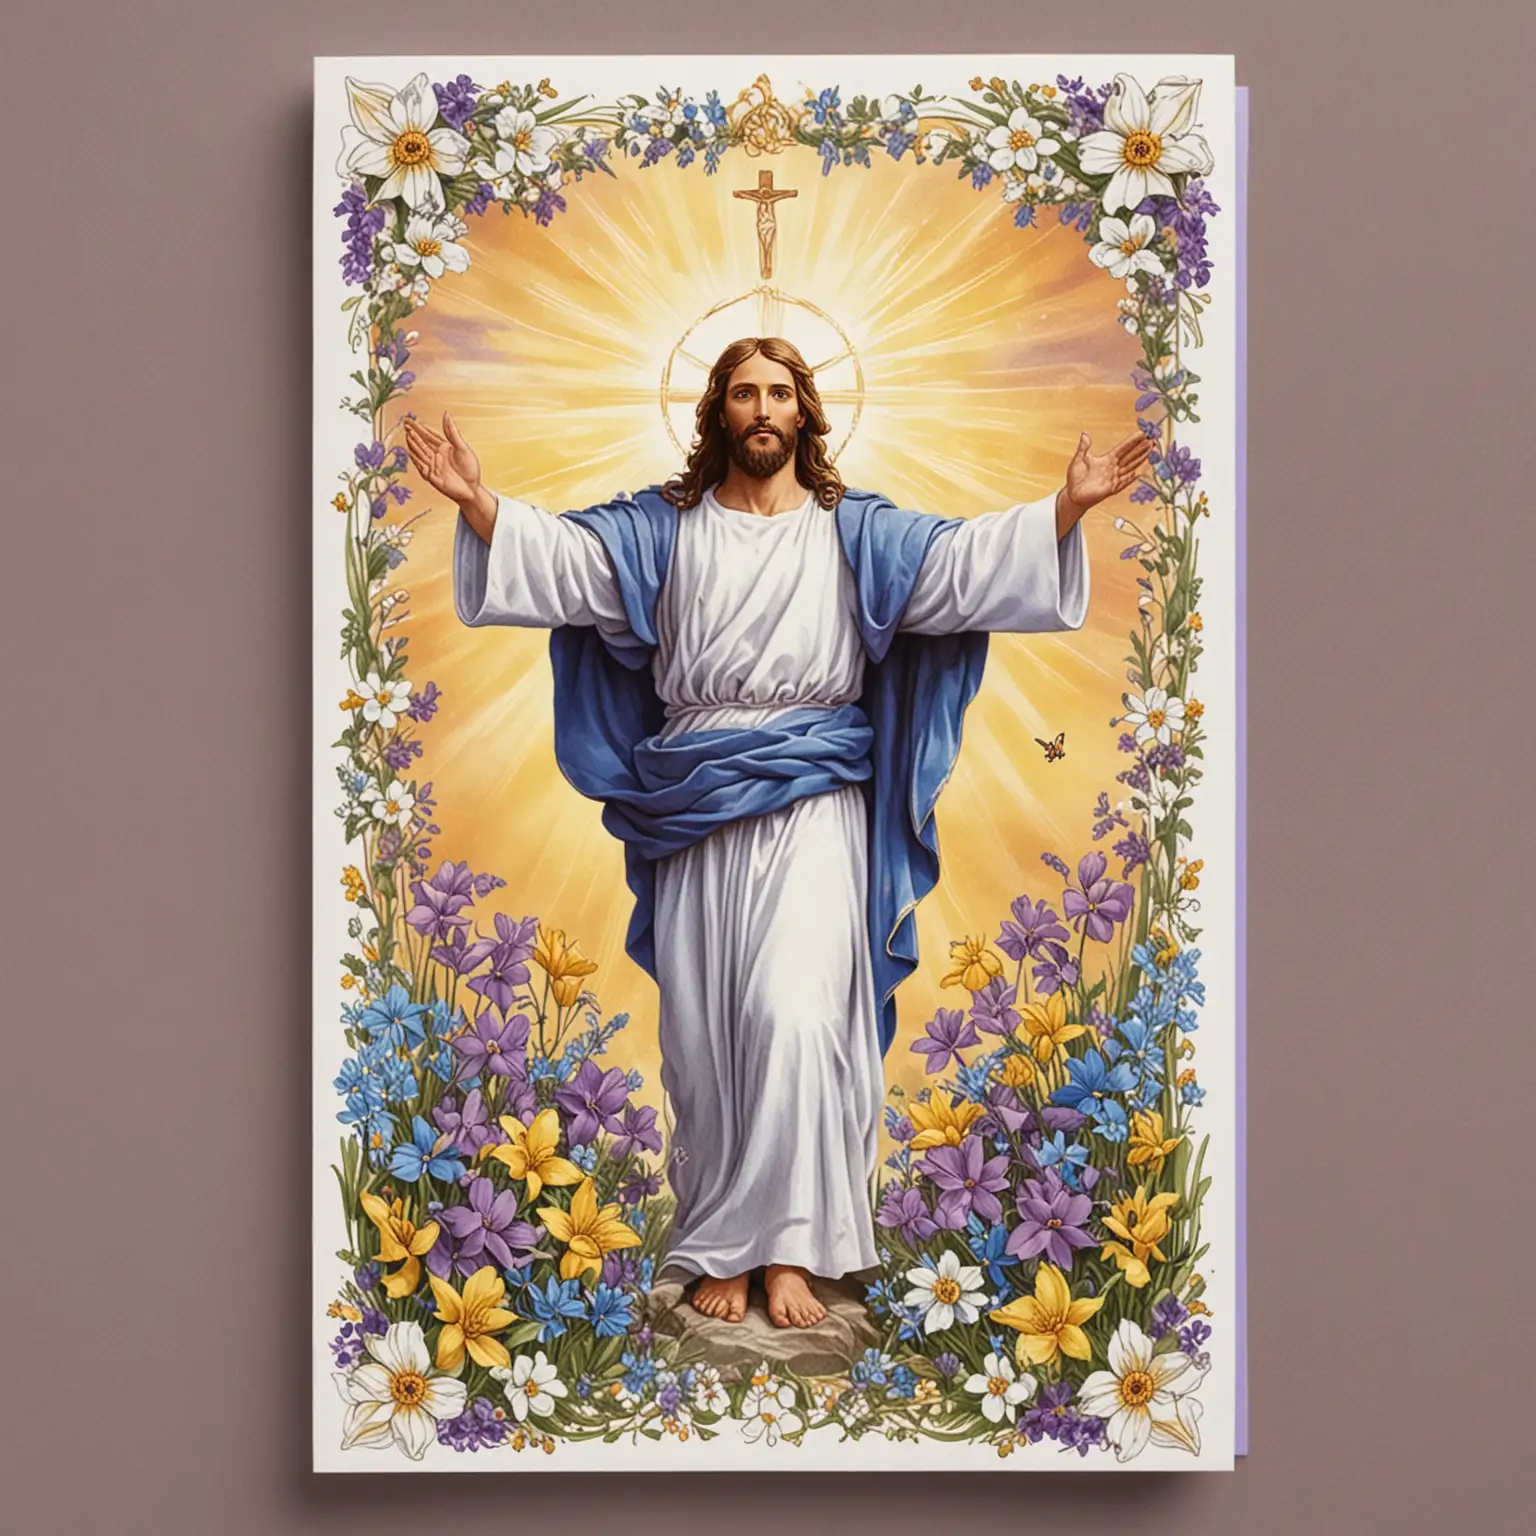 Card size 11.5 x 17 cm.   nPicture of  Risen Christ with outstretched arms- catholic design in the centre.nBackground with Easter flowers, purple, blue, yellow, white.  Wording at top of card Easter Blessings